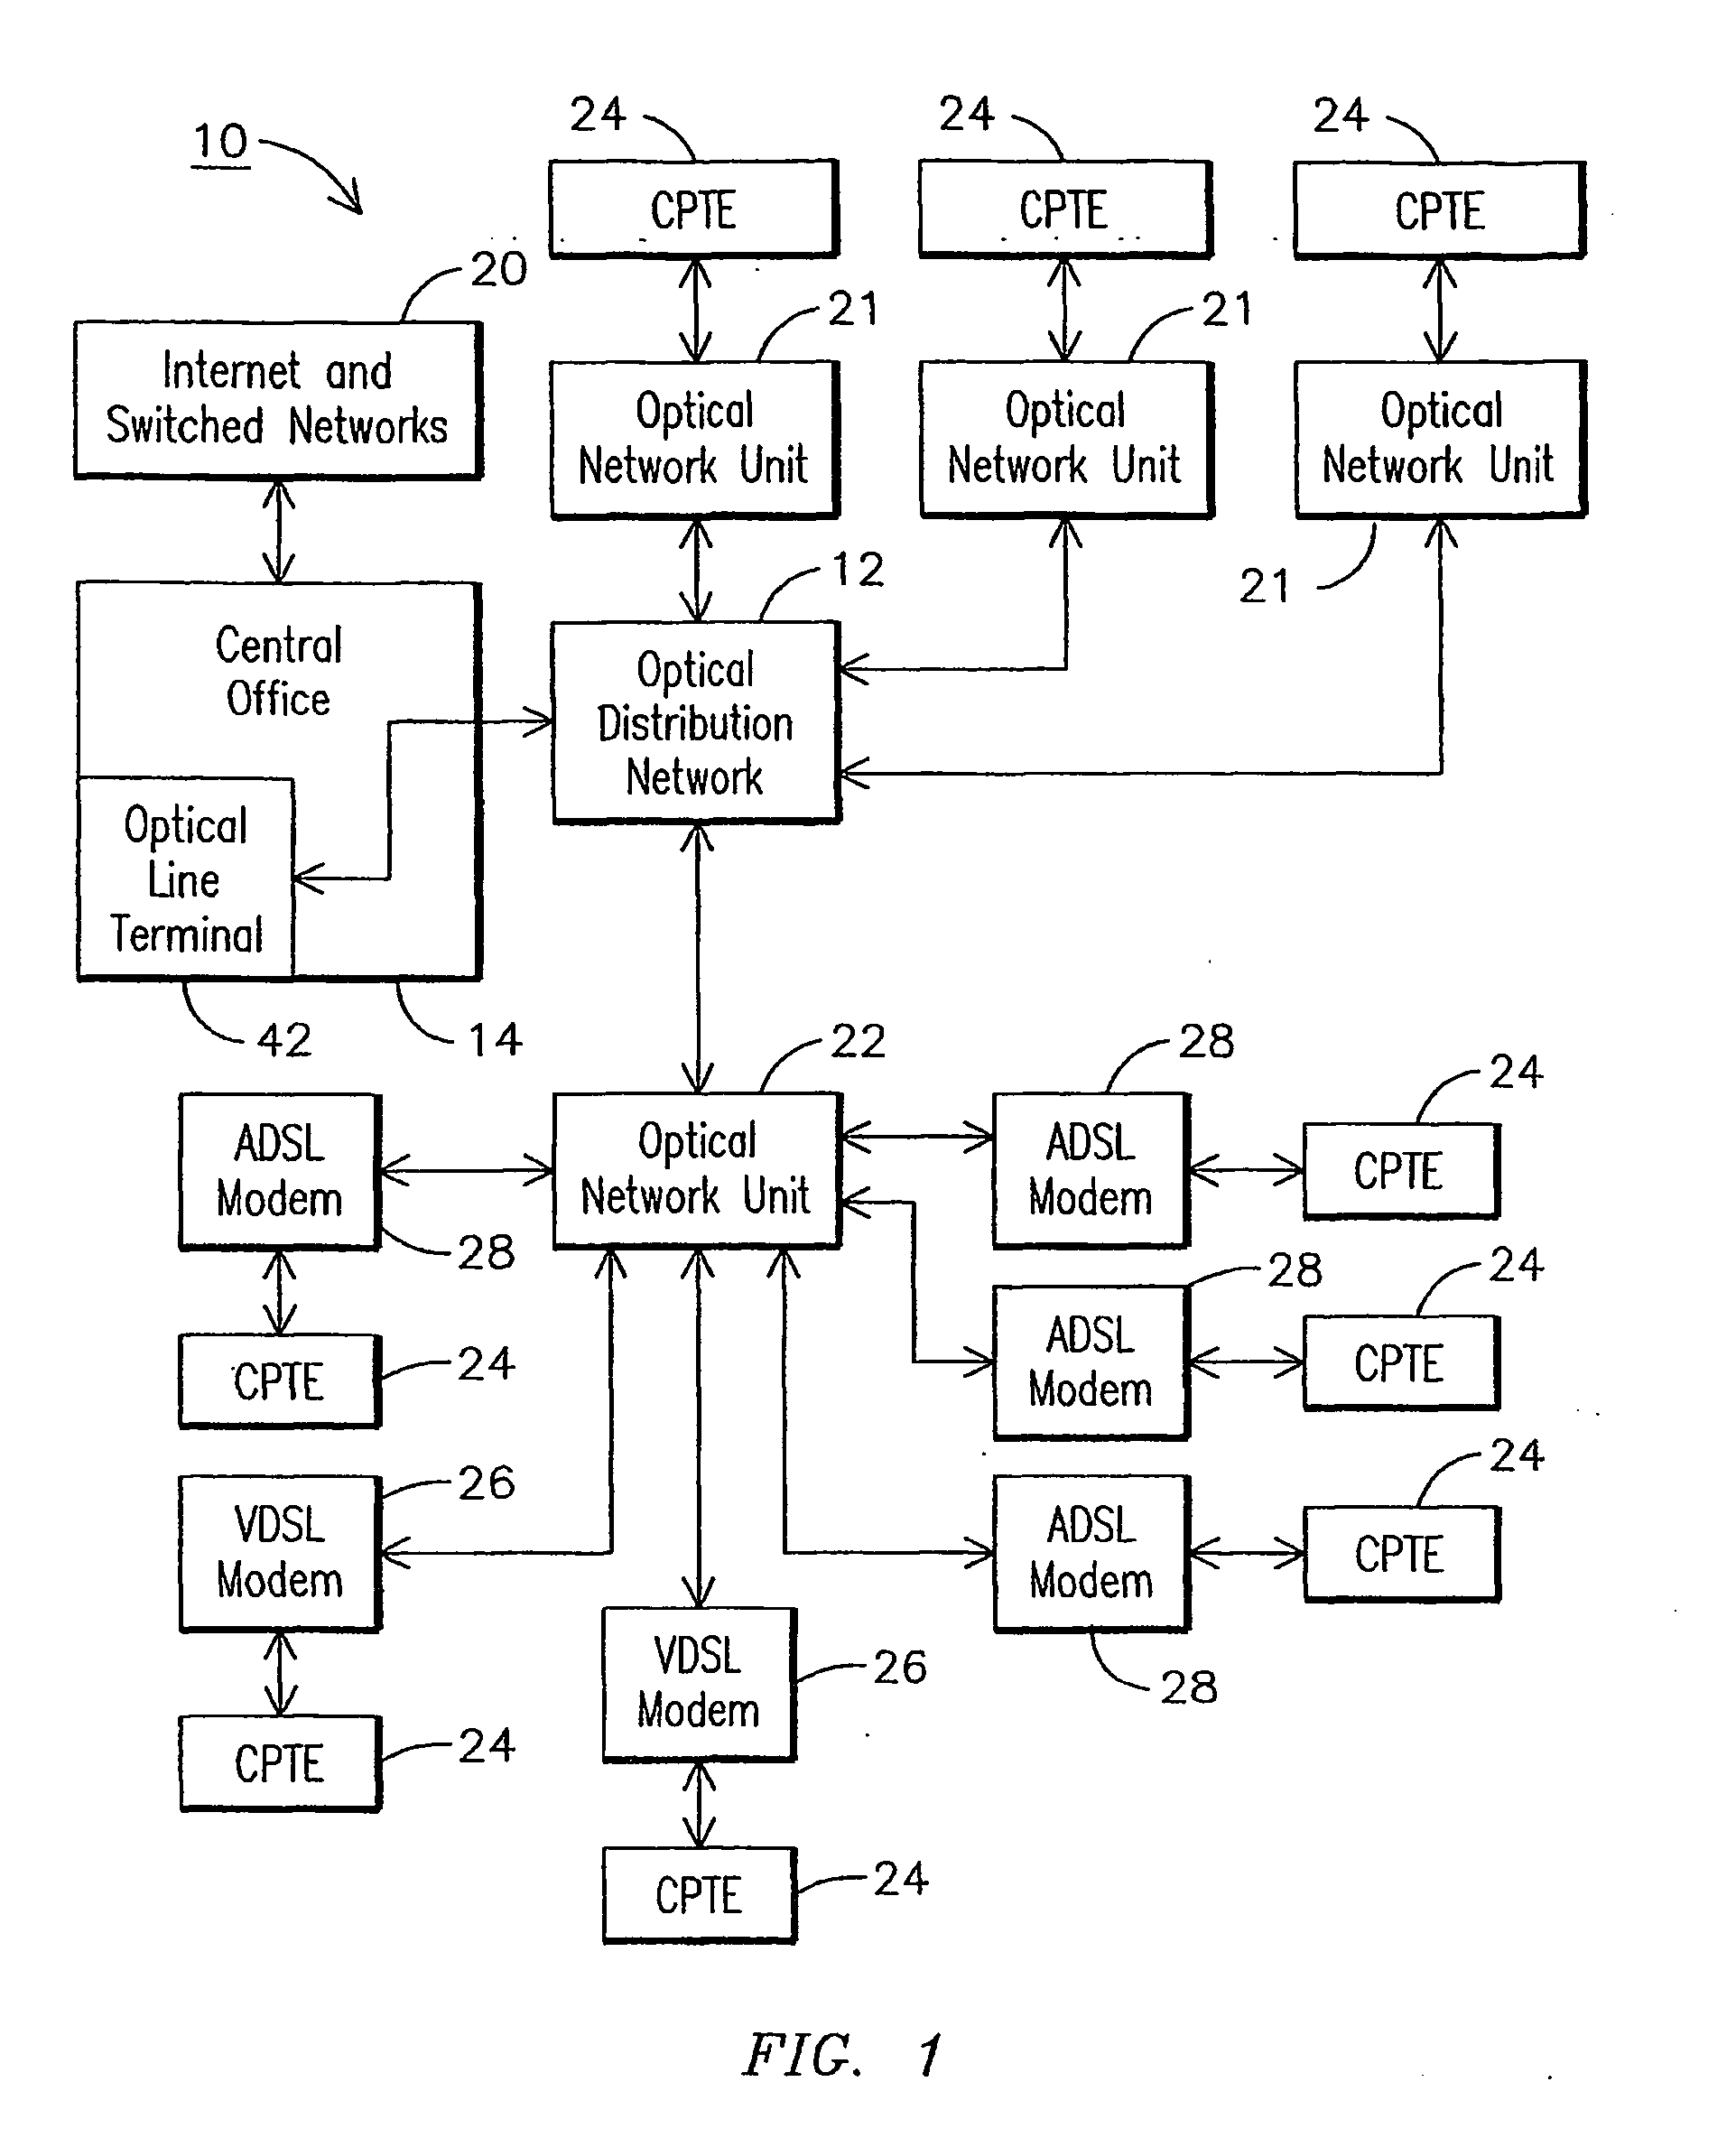 Passive optical network unit management and control interface support for a digital subscriber line network